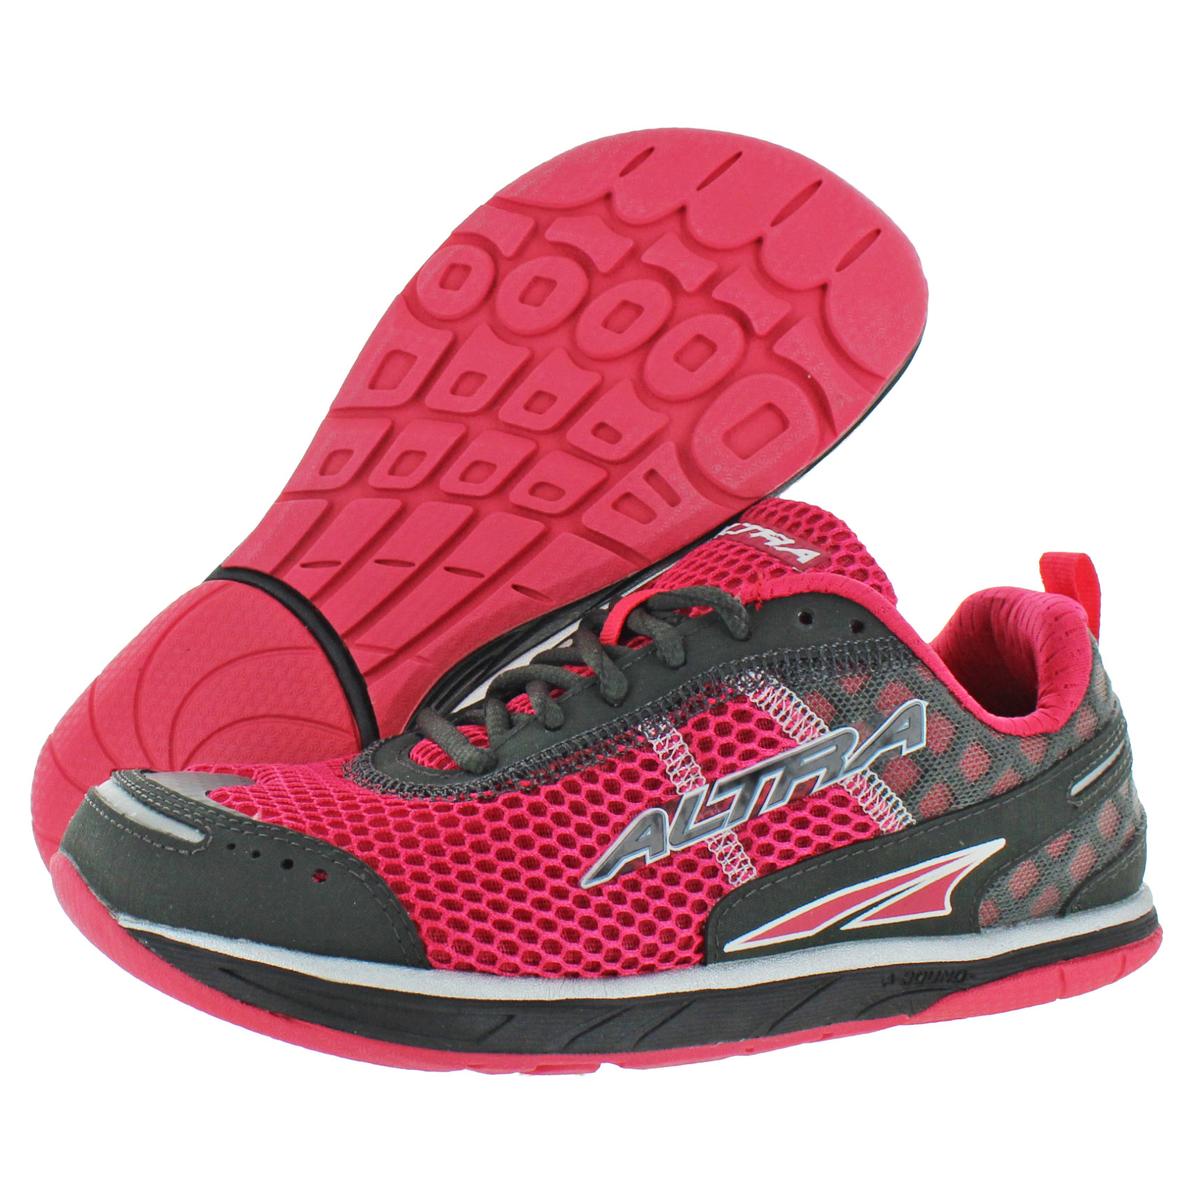 Altra Womens Intuition 1.5 Exercise Performance Running Shoes Sneakers ...